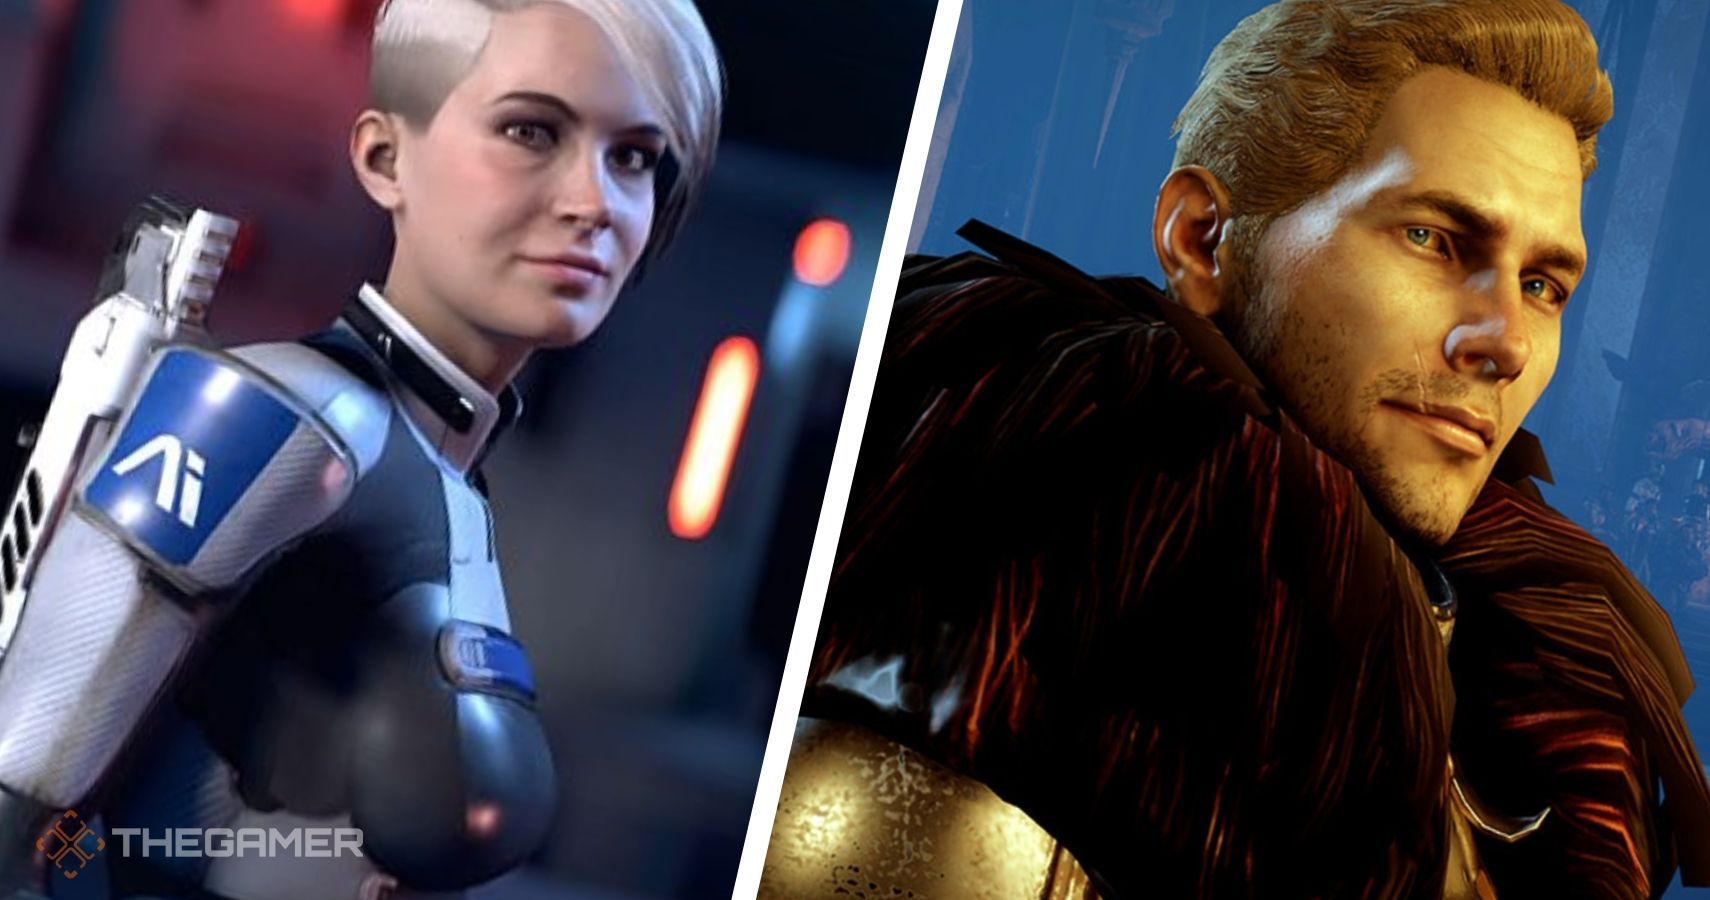 A character from Mass Effect on the left: a woman called Cora. She has short blonde hair. A Dragon Age character is on the right, Cullen, a man with bright blond hair and wearing armor